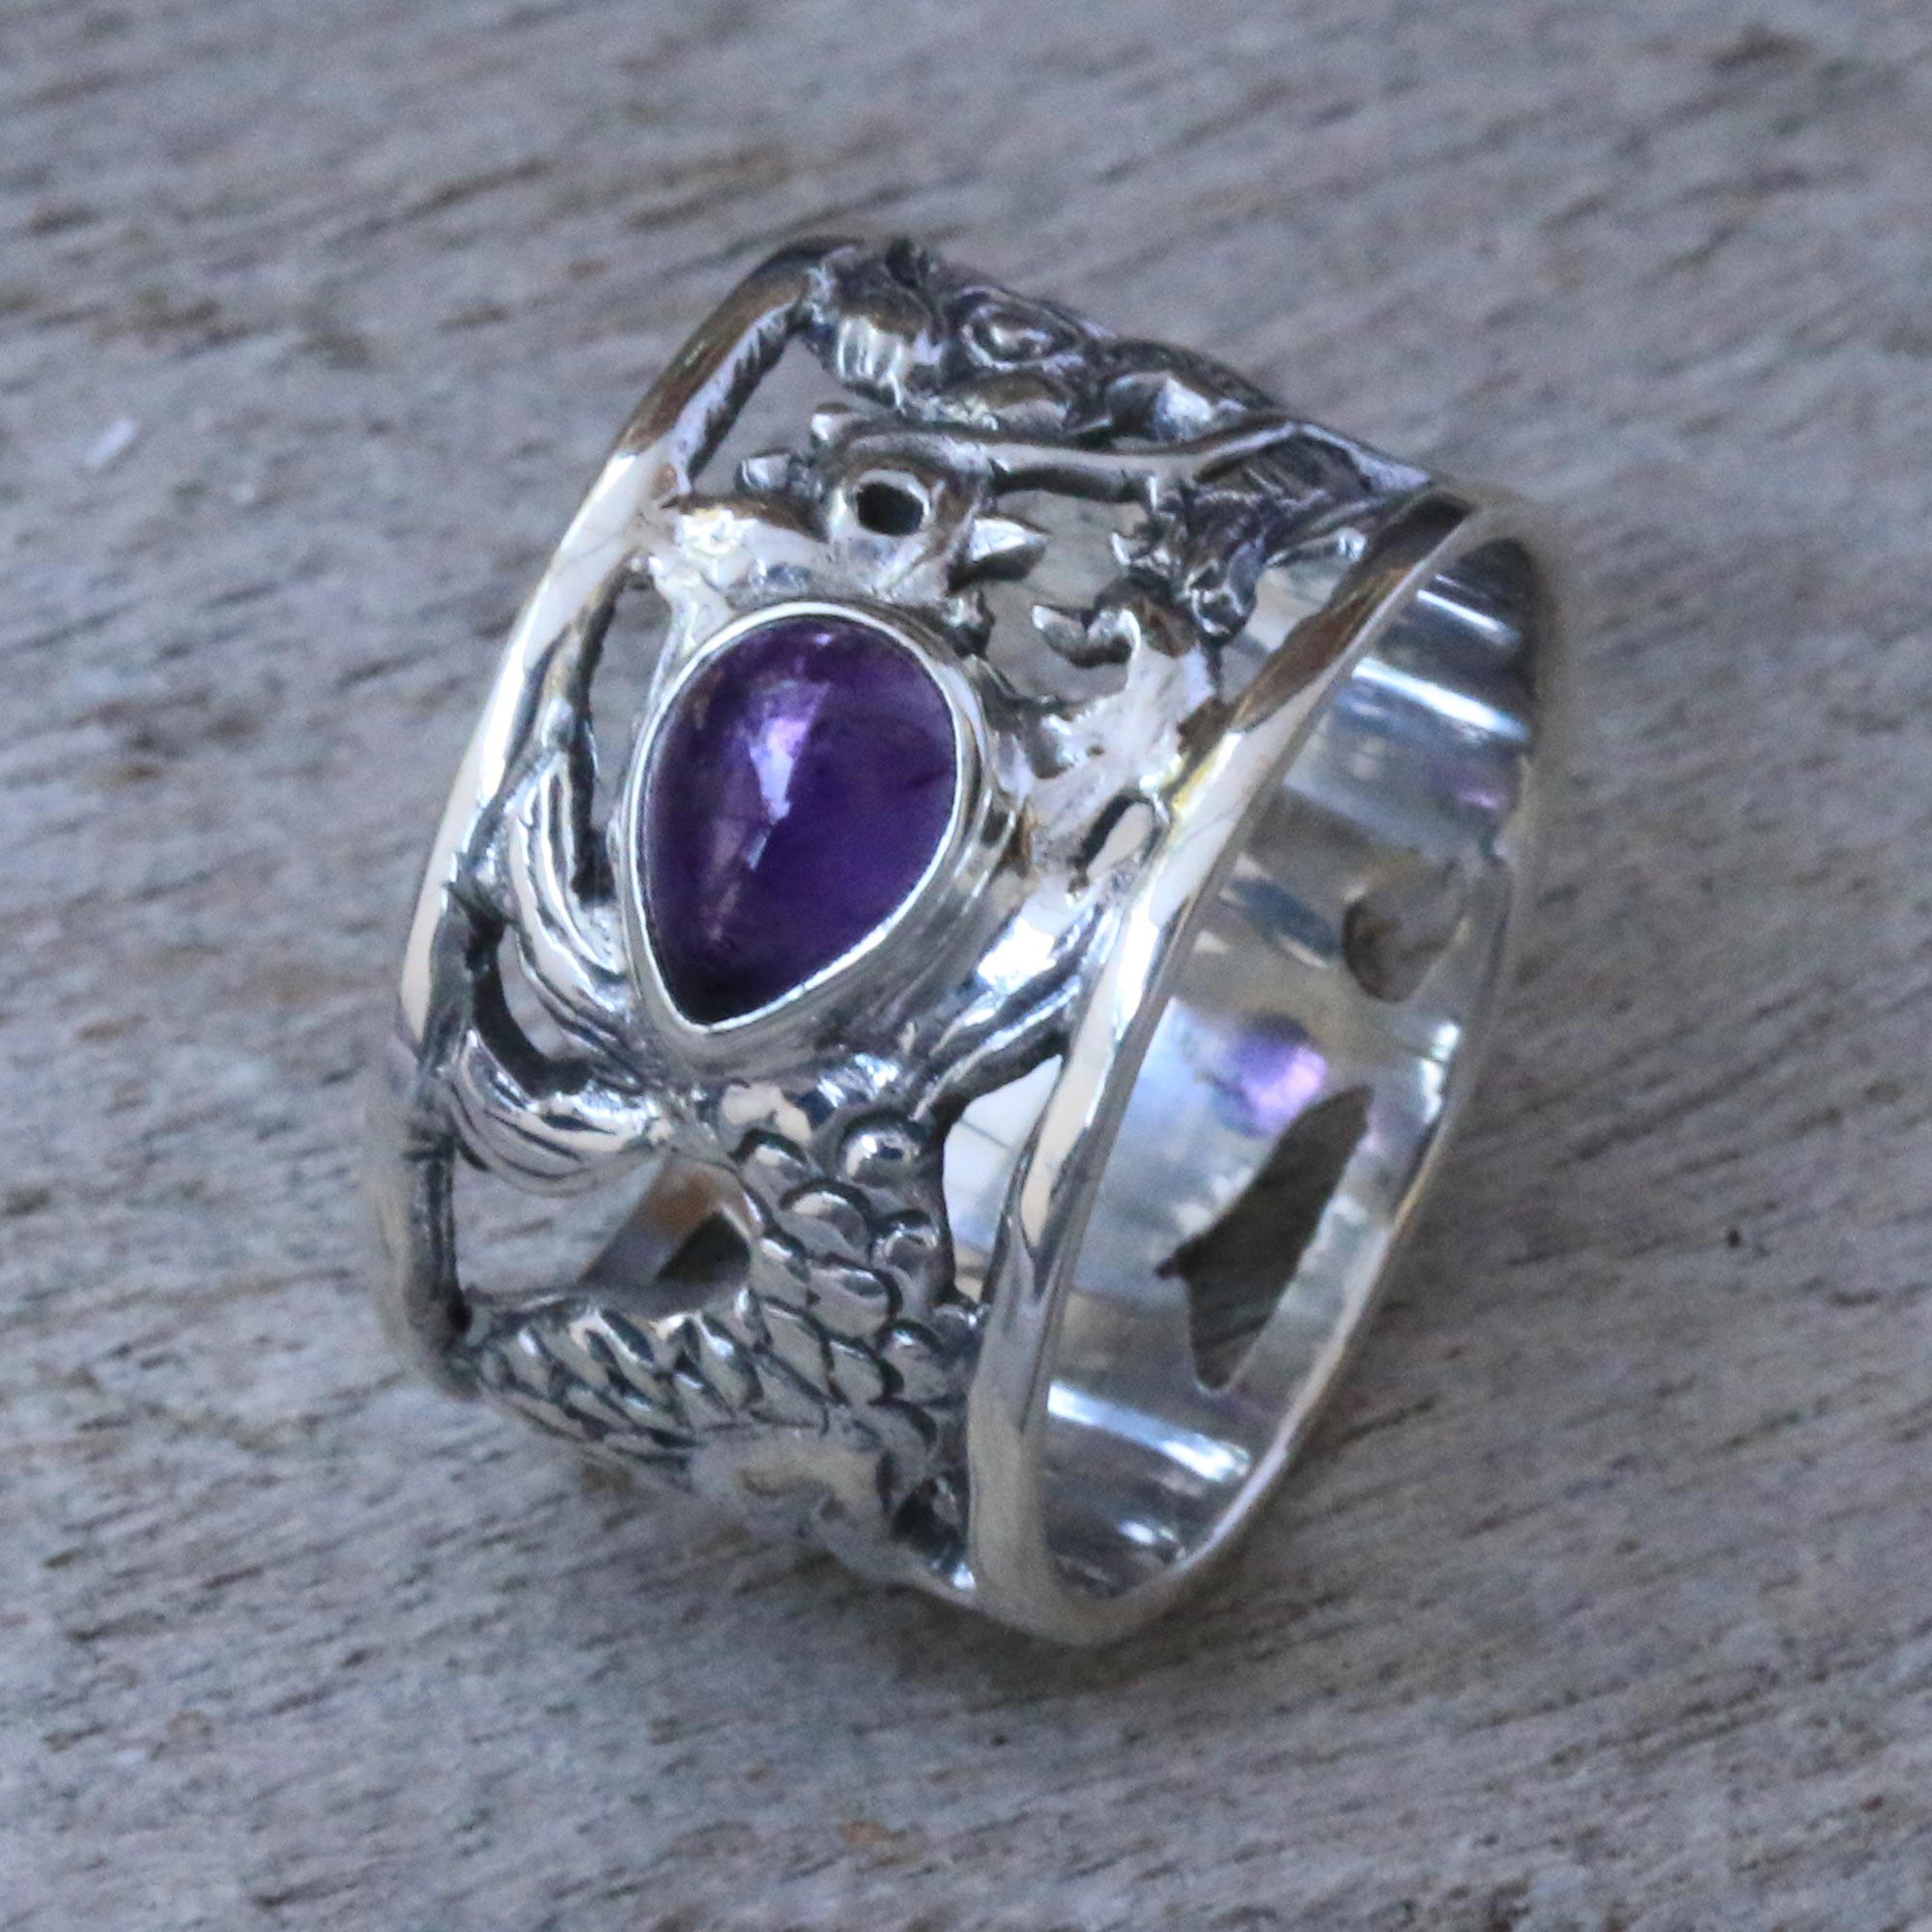 UNICEF Market | Handcrafted Sterling Silver Dragon Ring with Amethyst ...